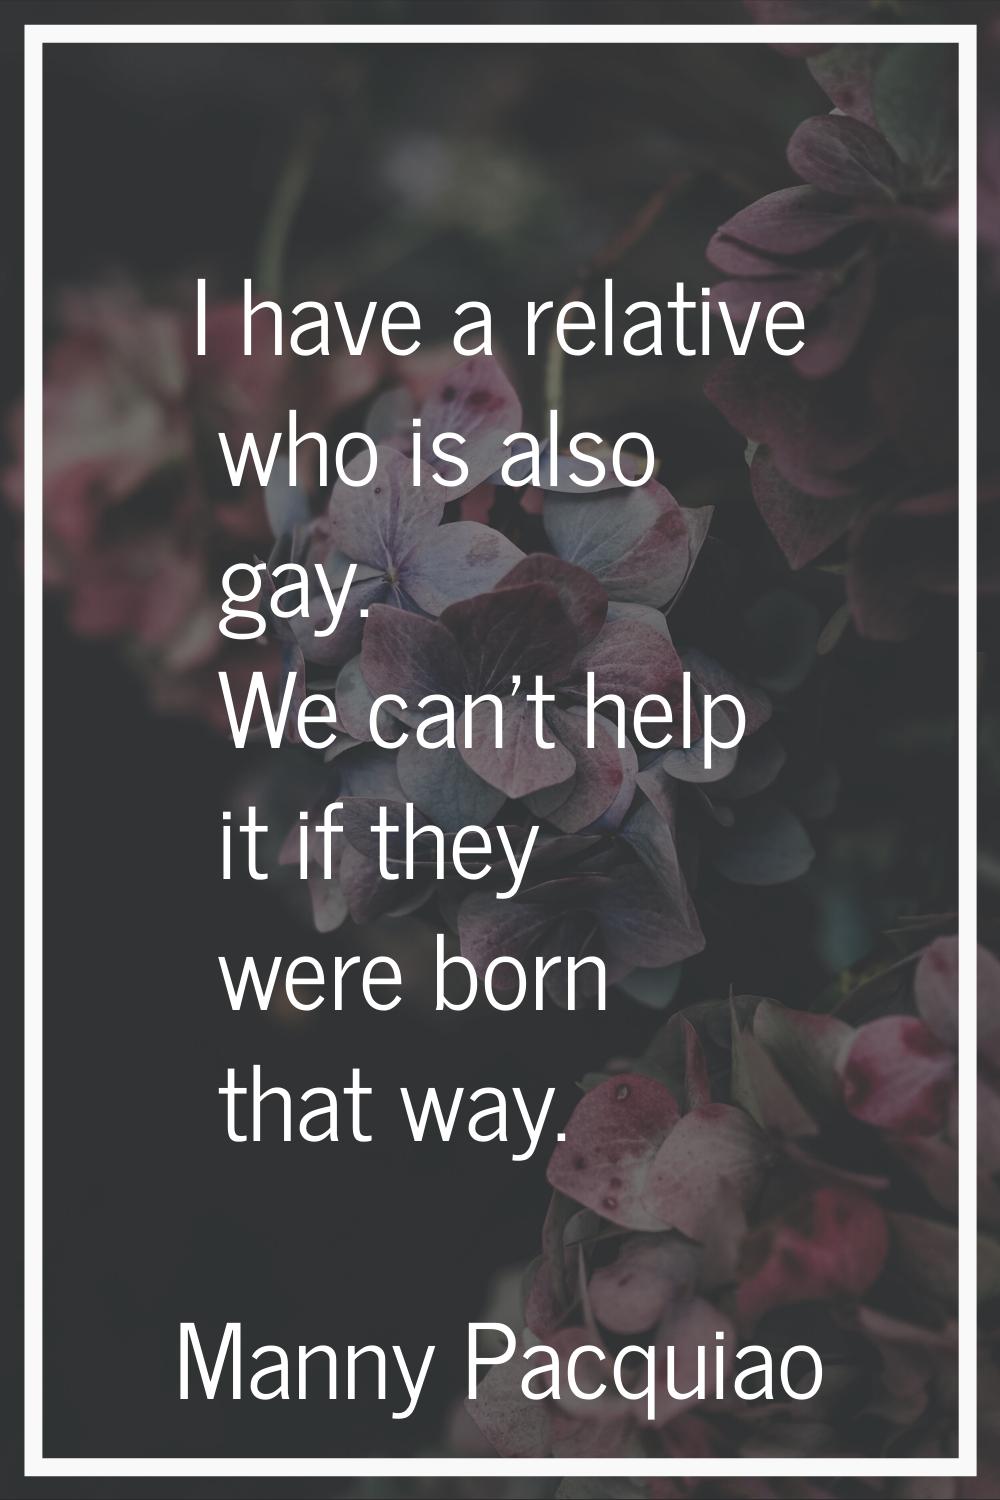 I have a relative who is also gay. We can't help it if they were born that way.